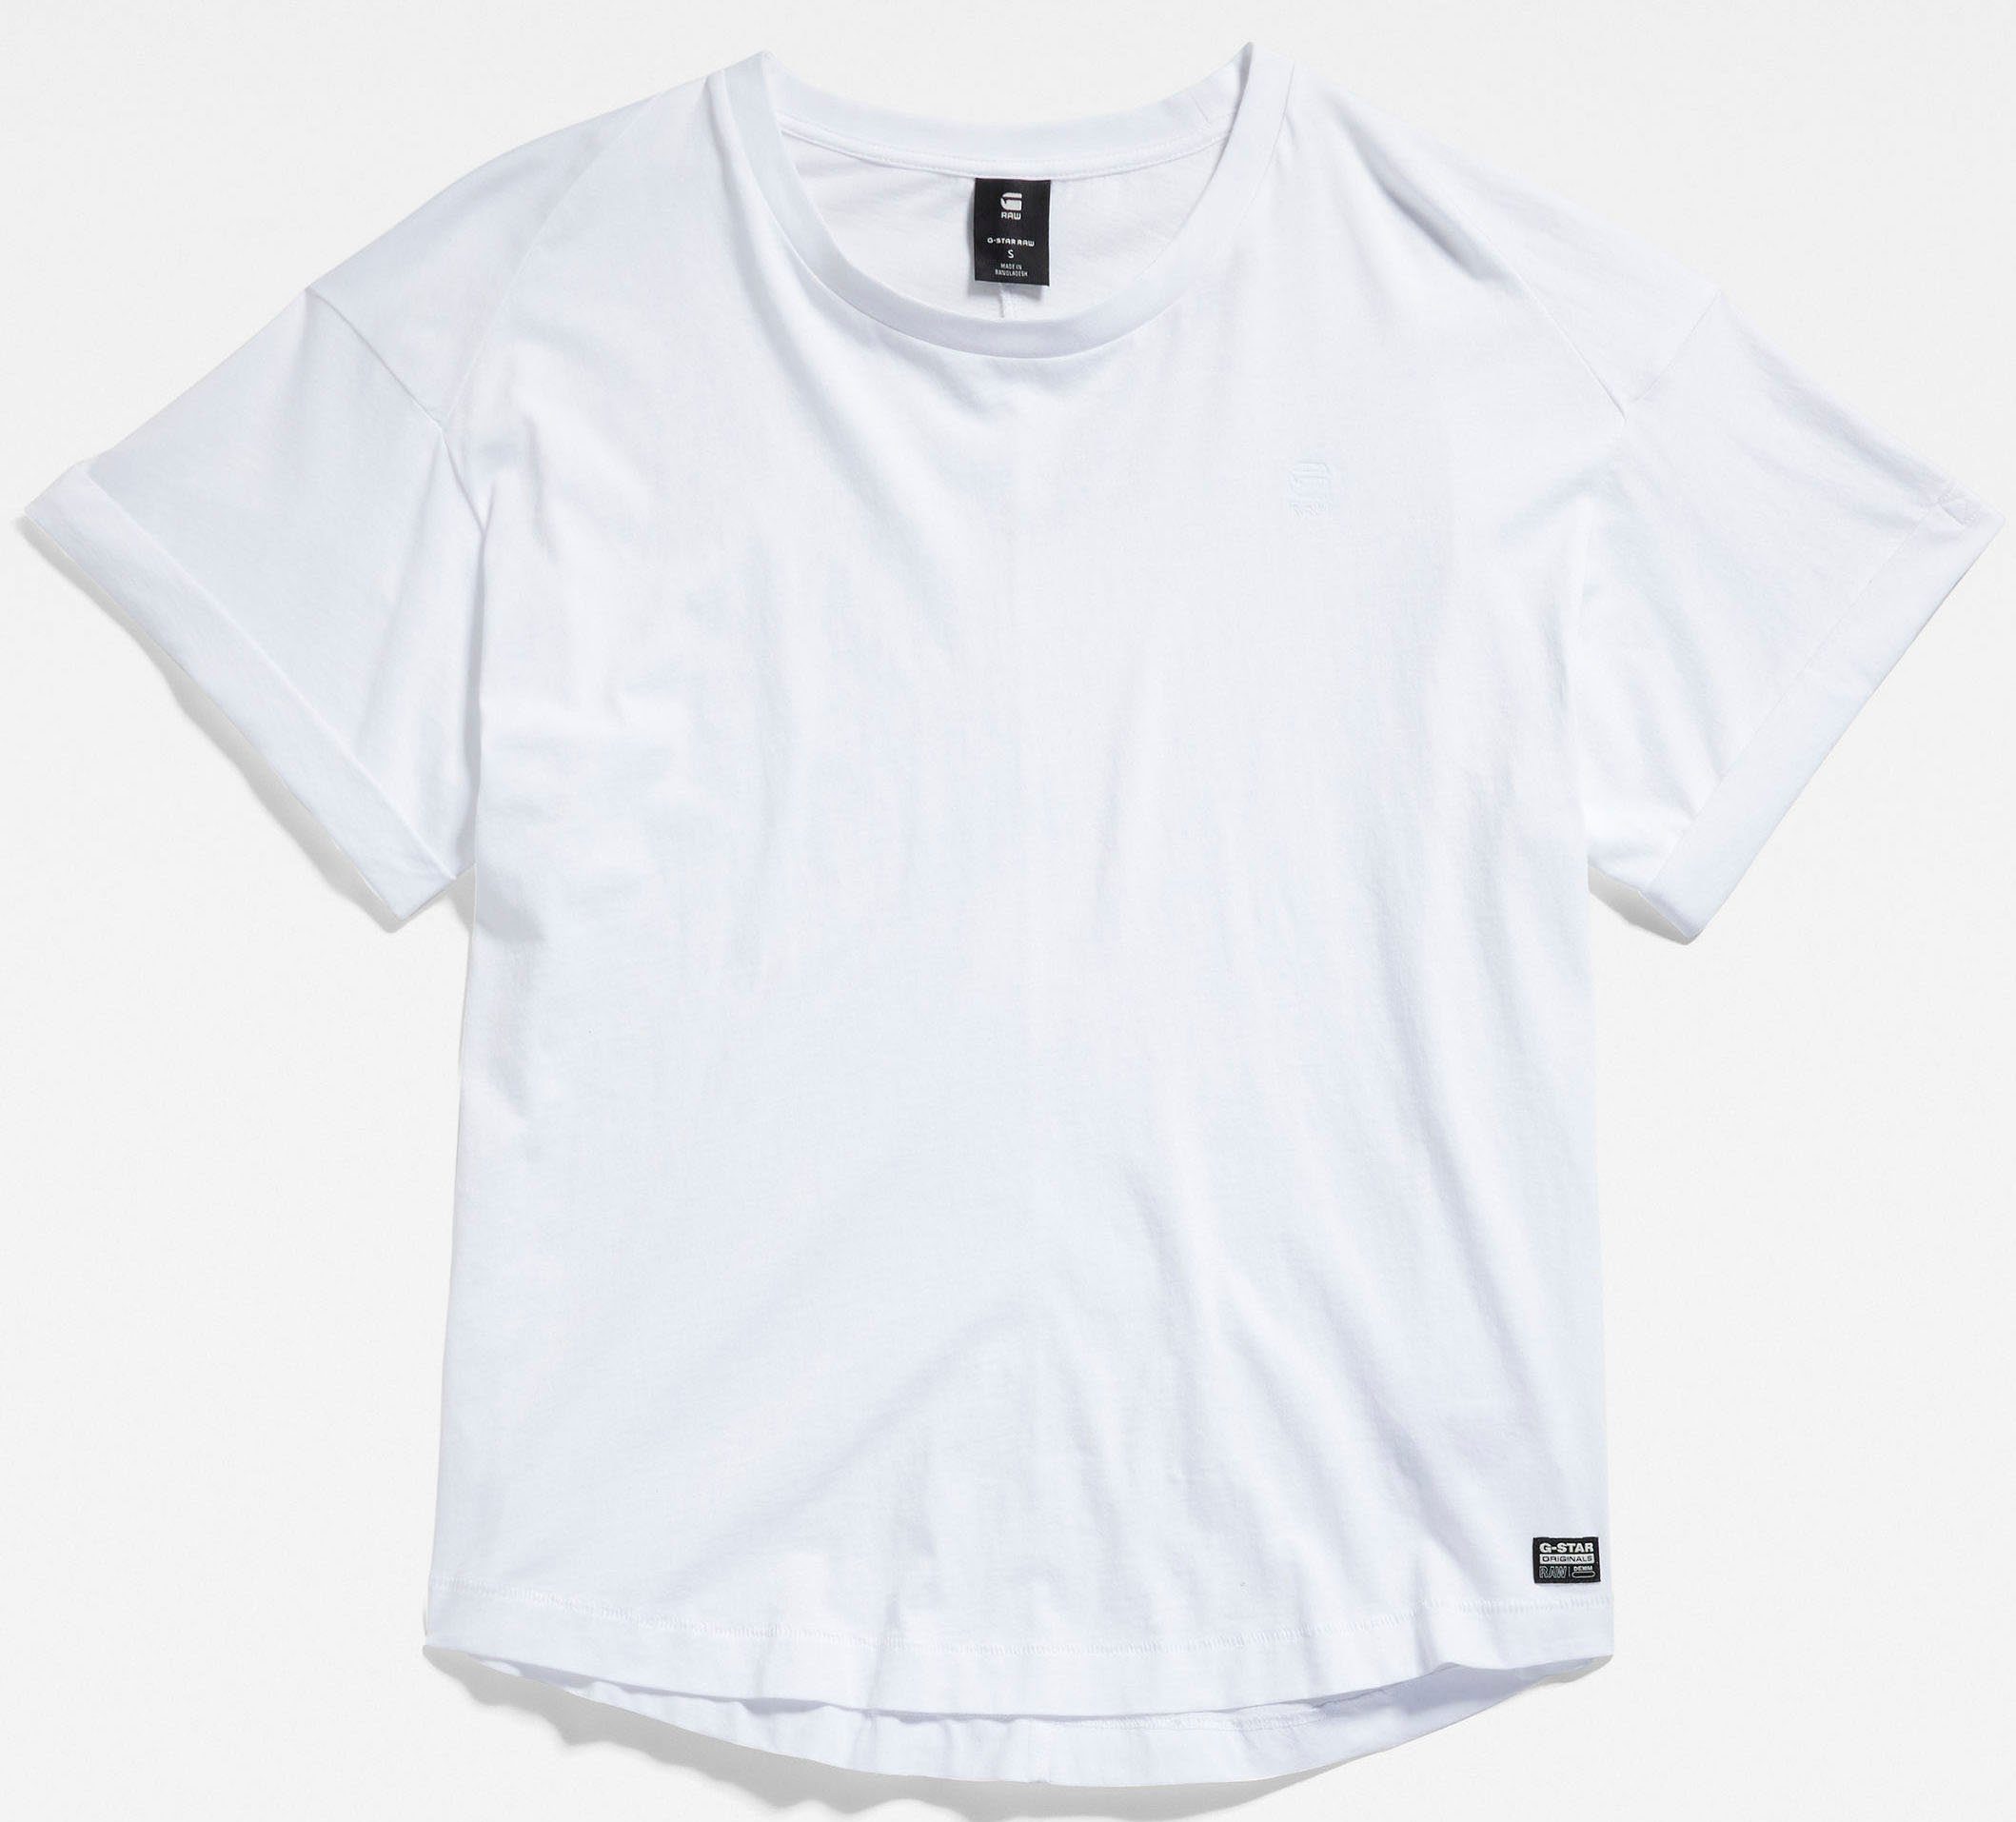 G-Star RAW T-shirt Rolled up